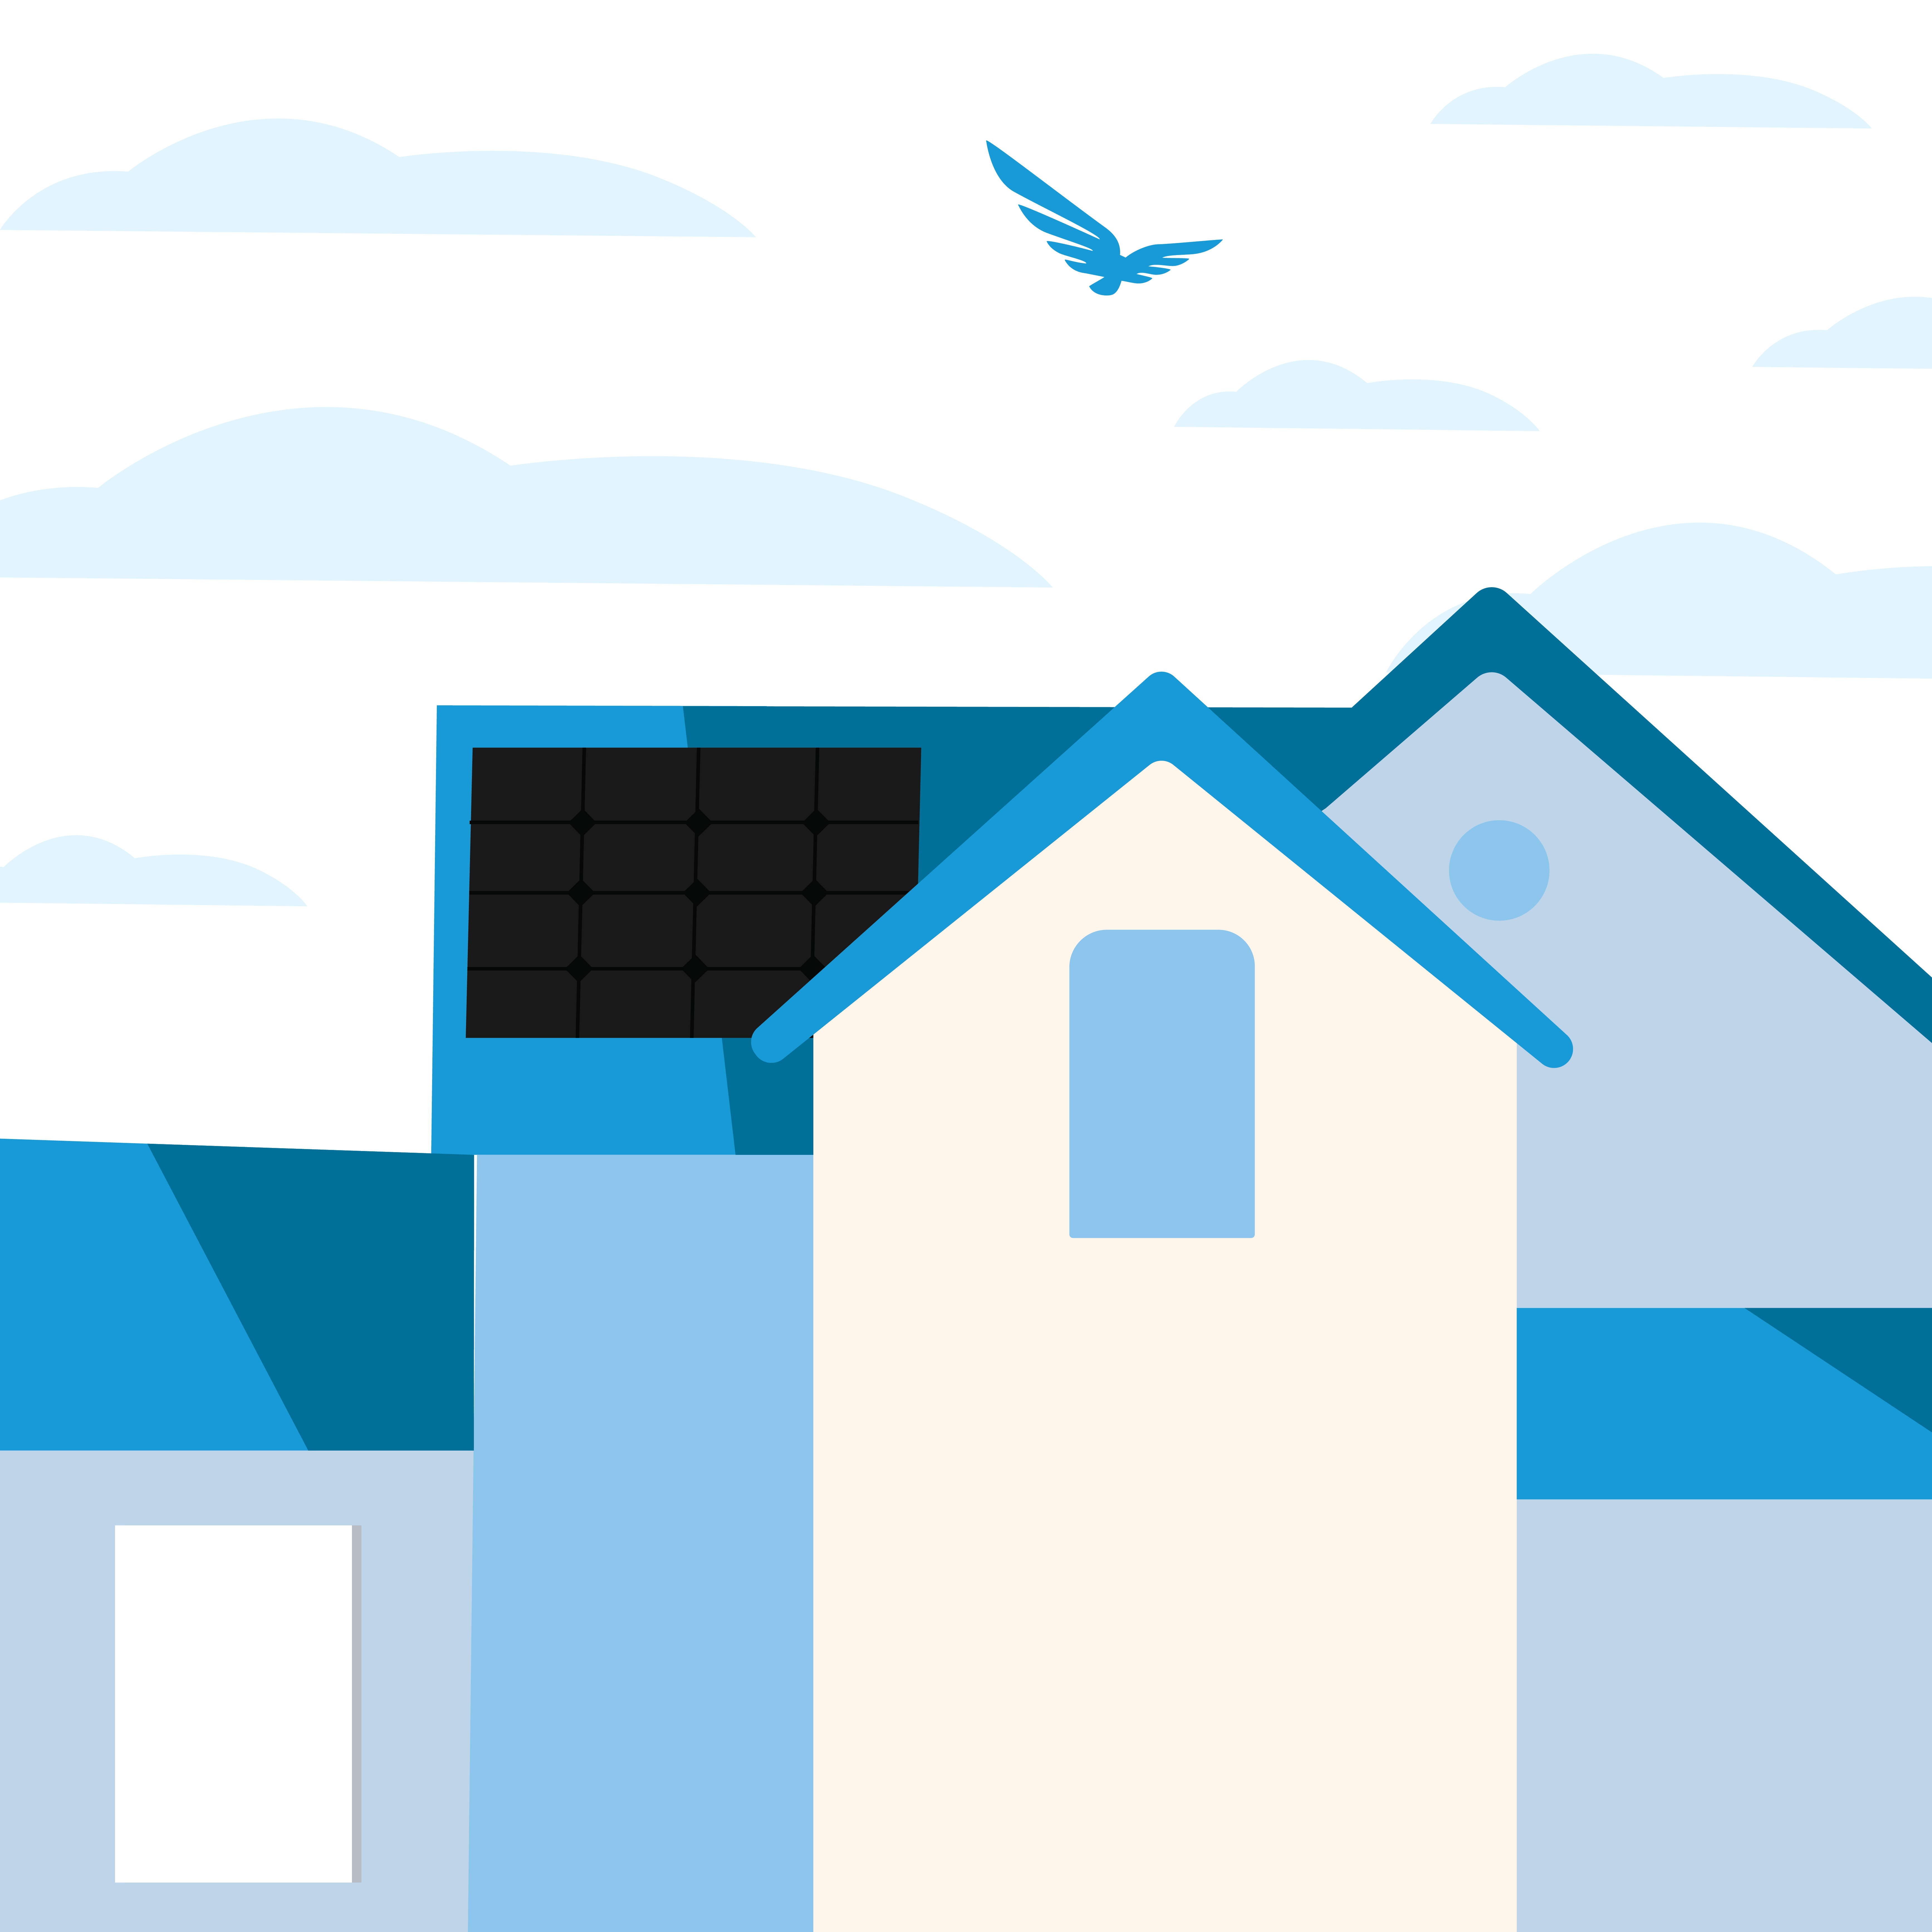 Blue and white house illustration with solar panel on roof and Blue Raven Solar icon in the sky